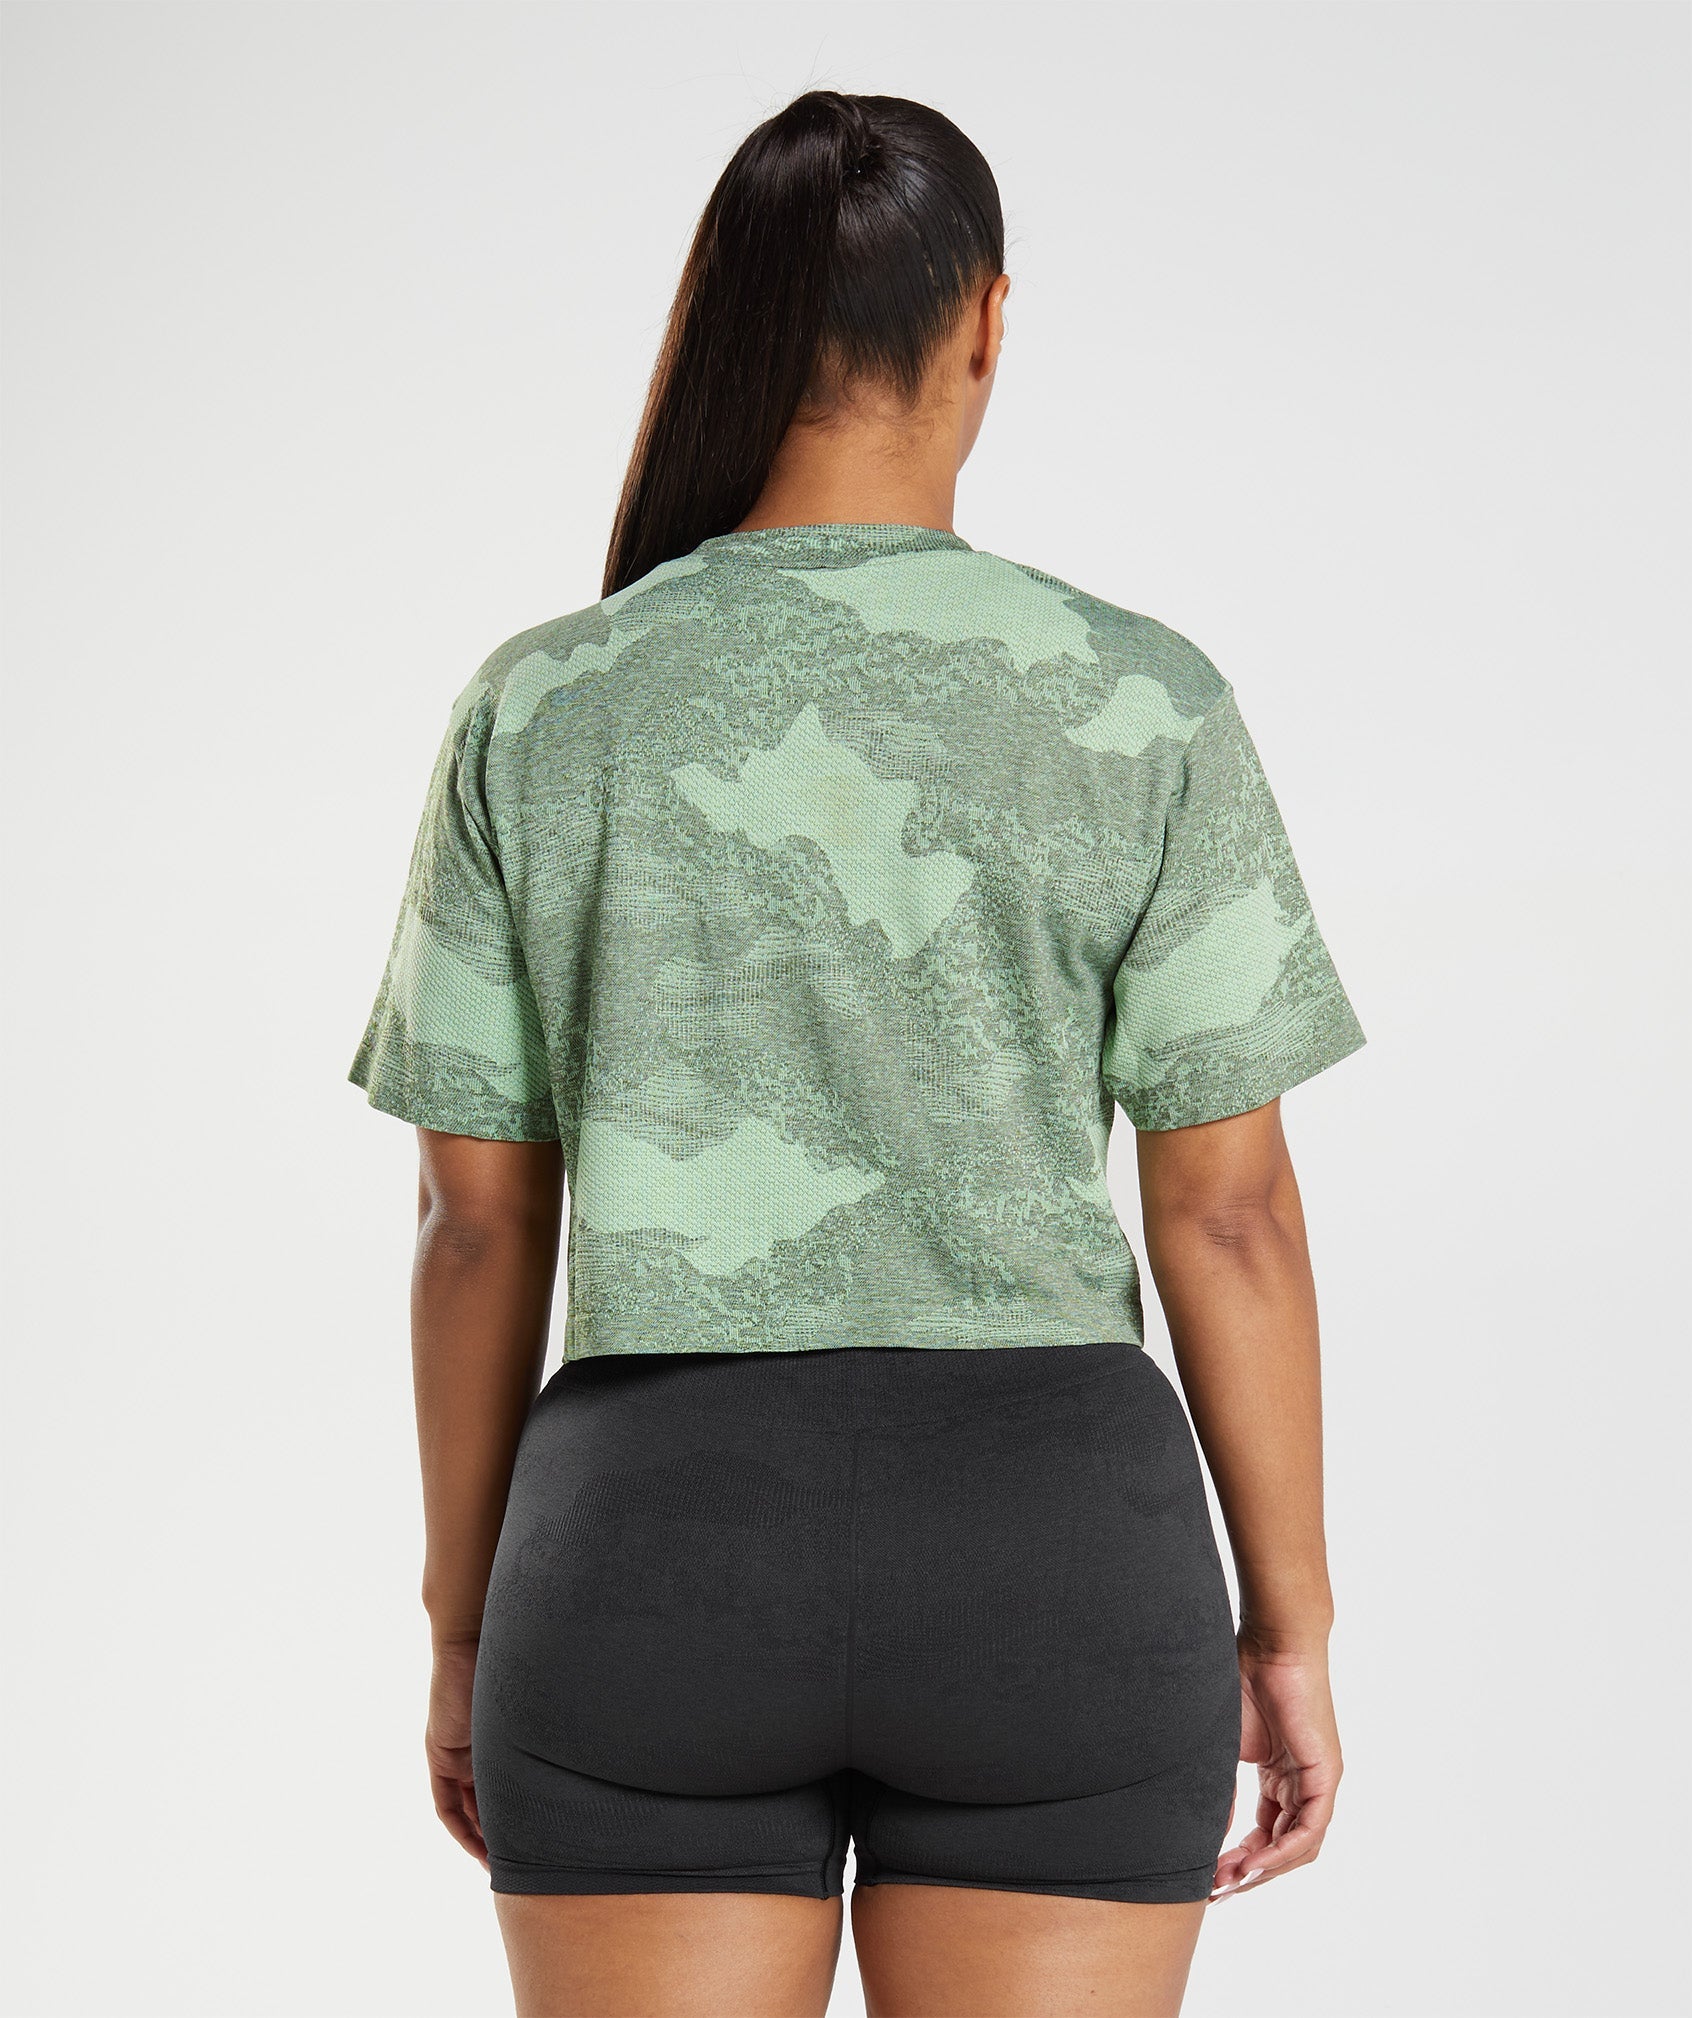 Adapt Camo Seamless Crop Top in Aloe Green/Moss Olive - view 2